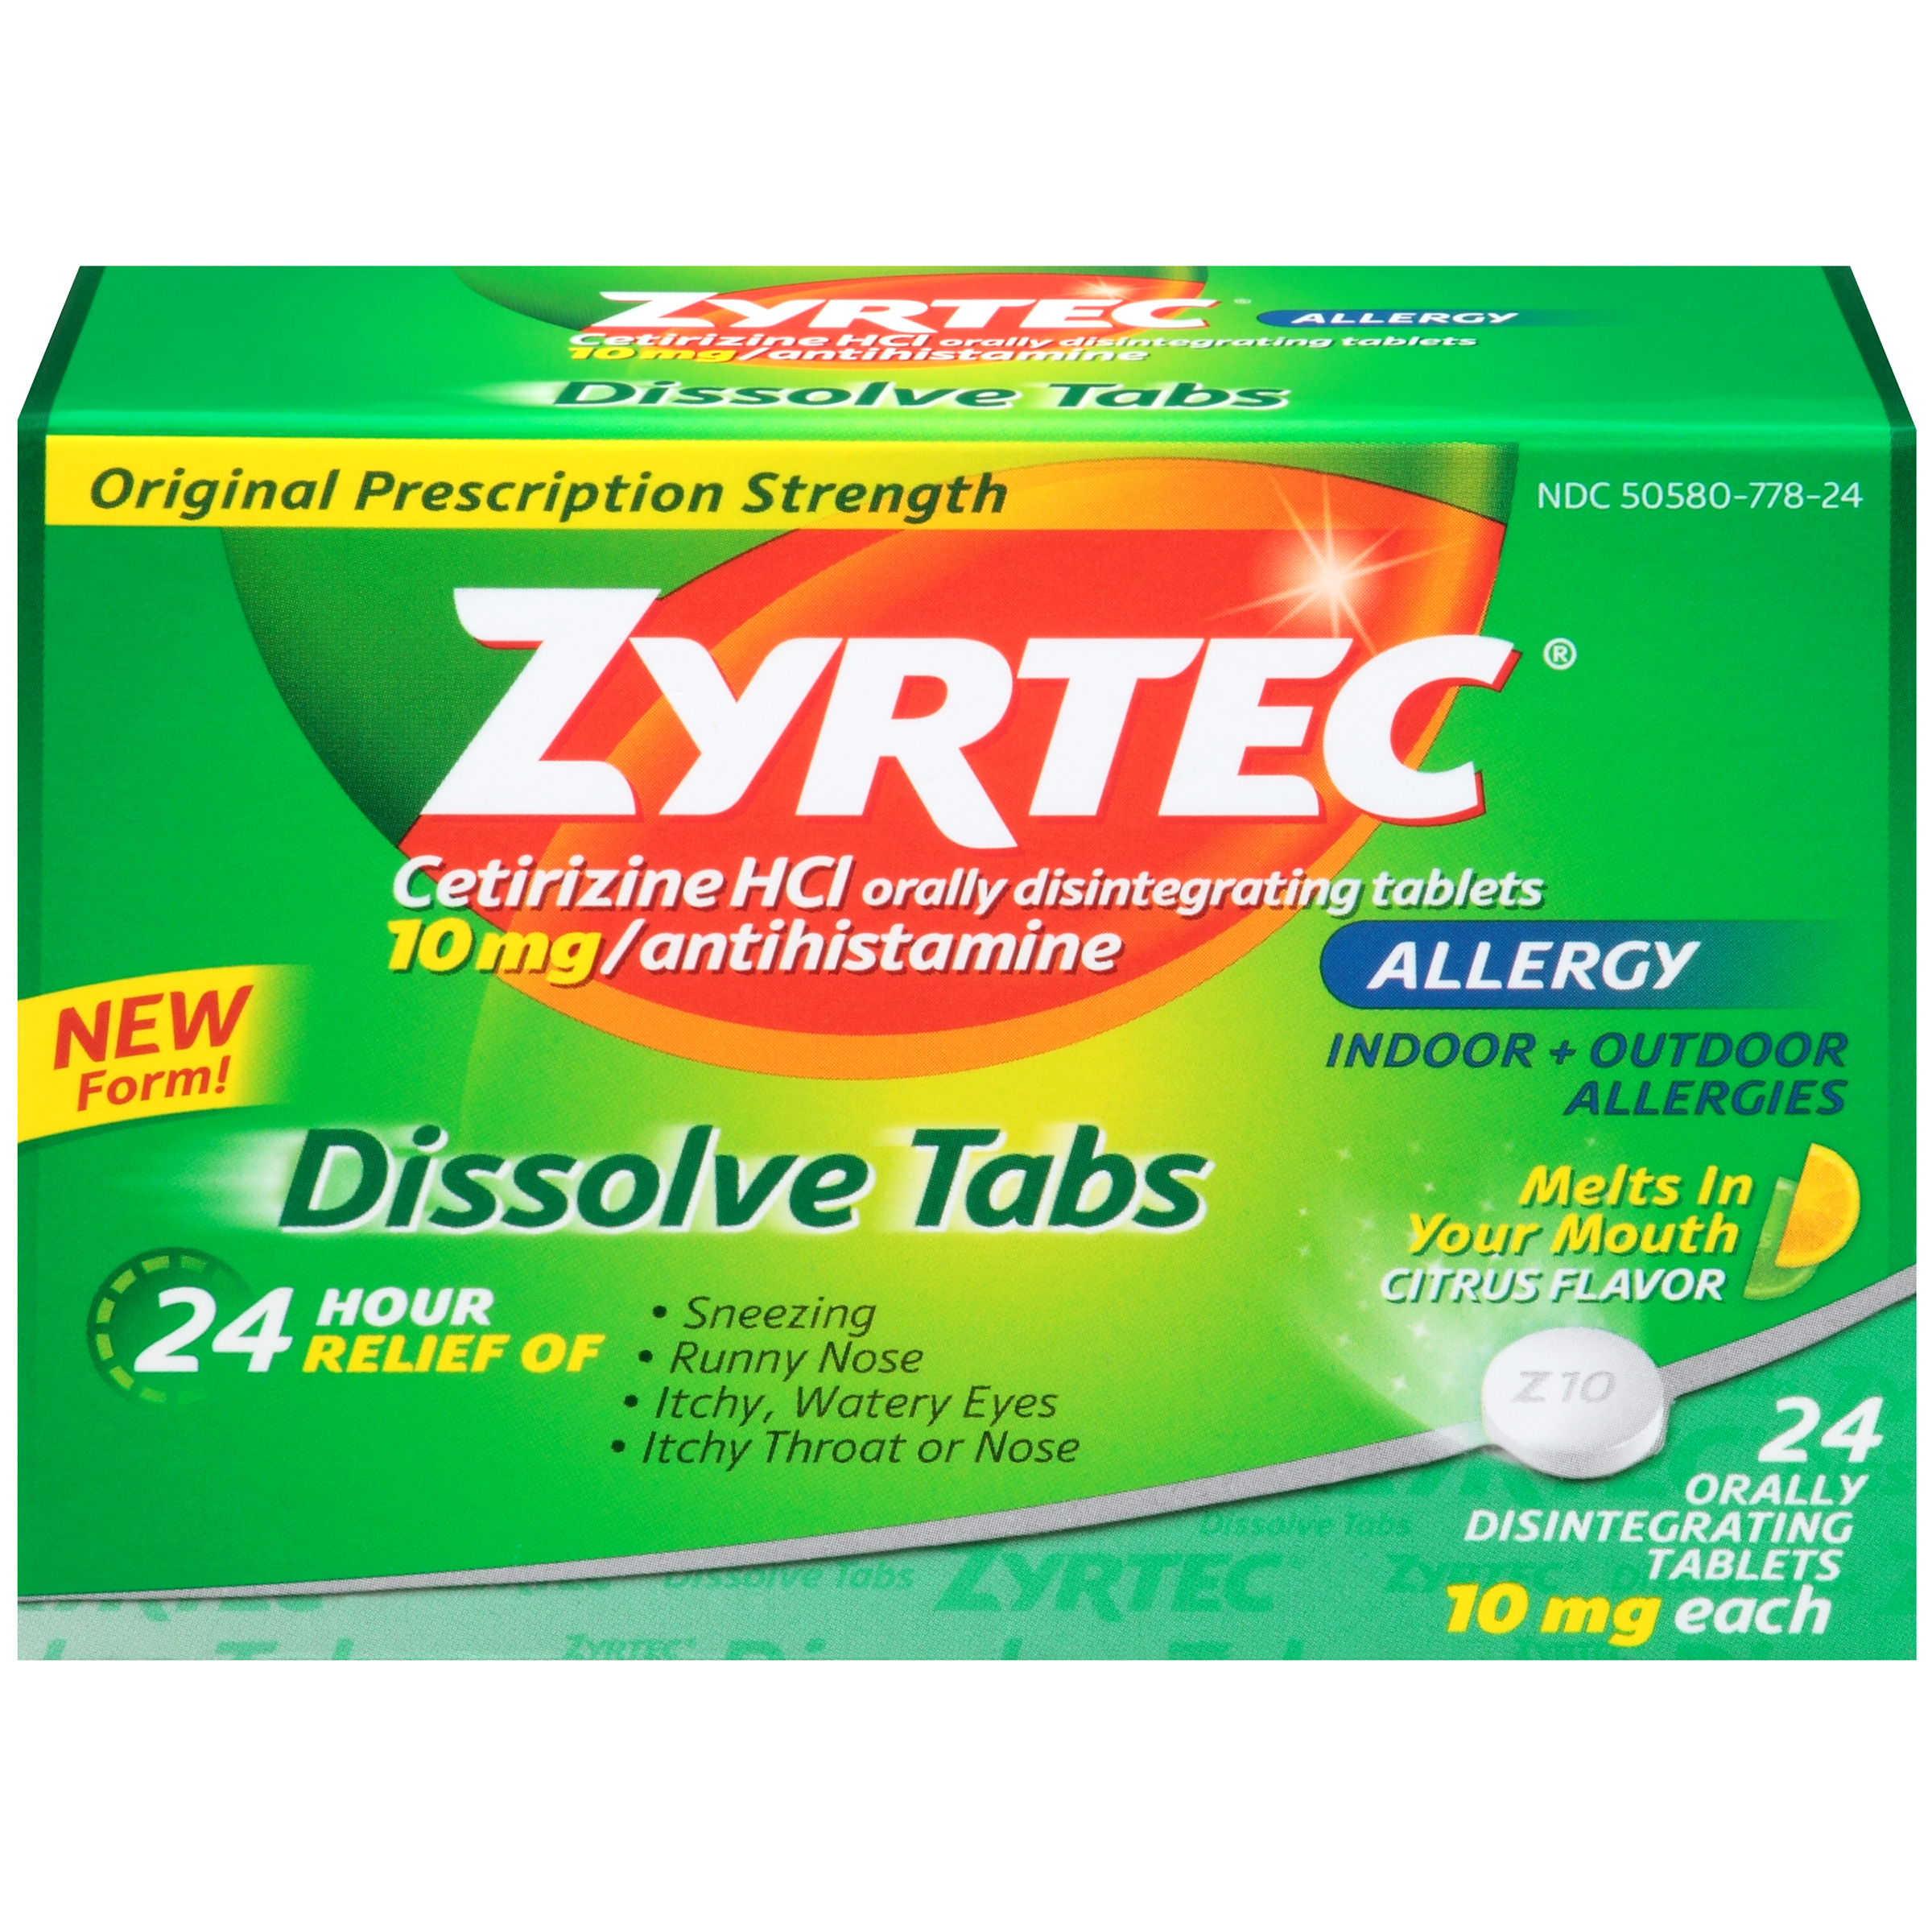 Zyrtec Dissolve Tabs Allergy 24 Hour Relief 10mg. 